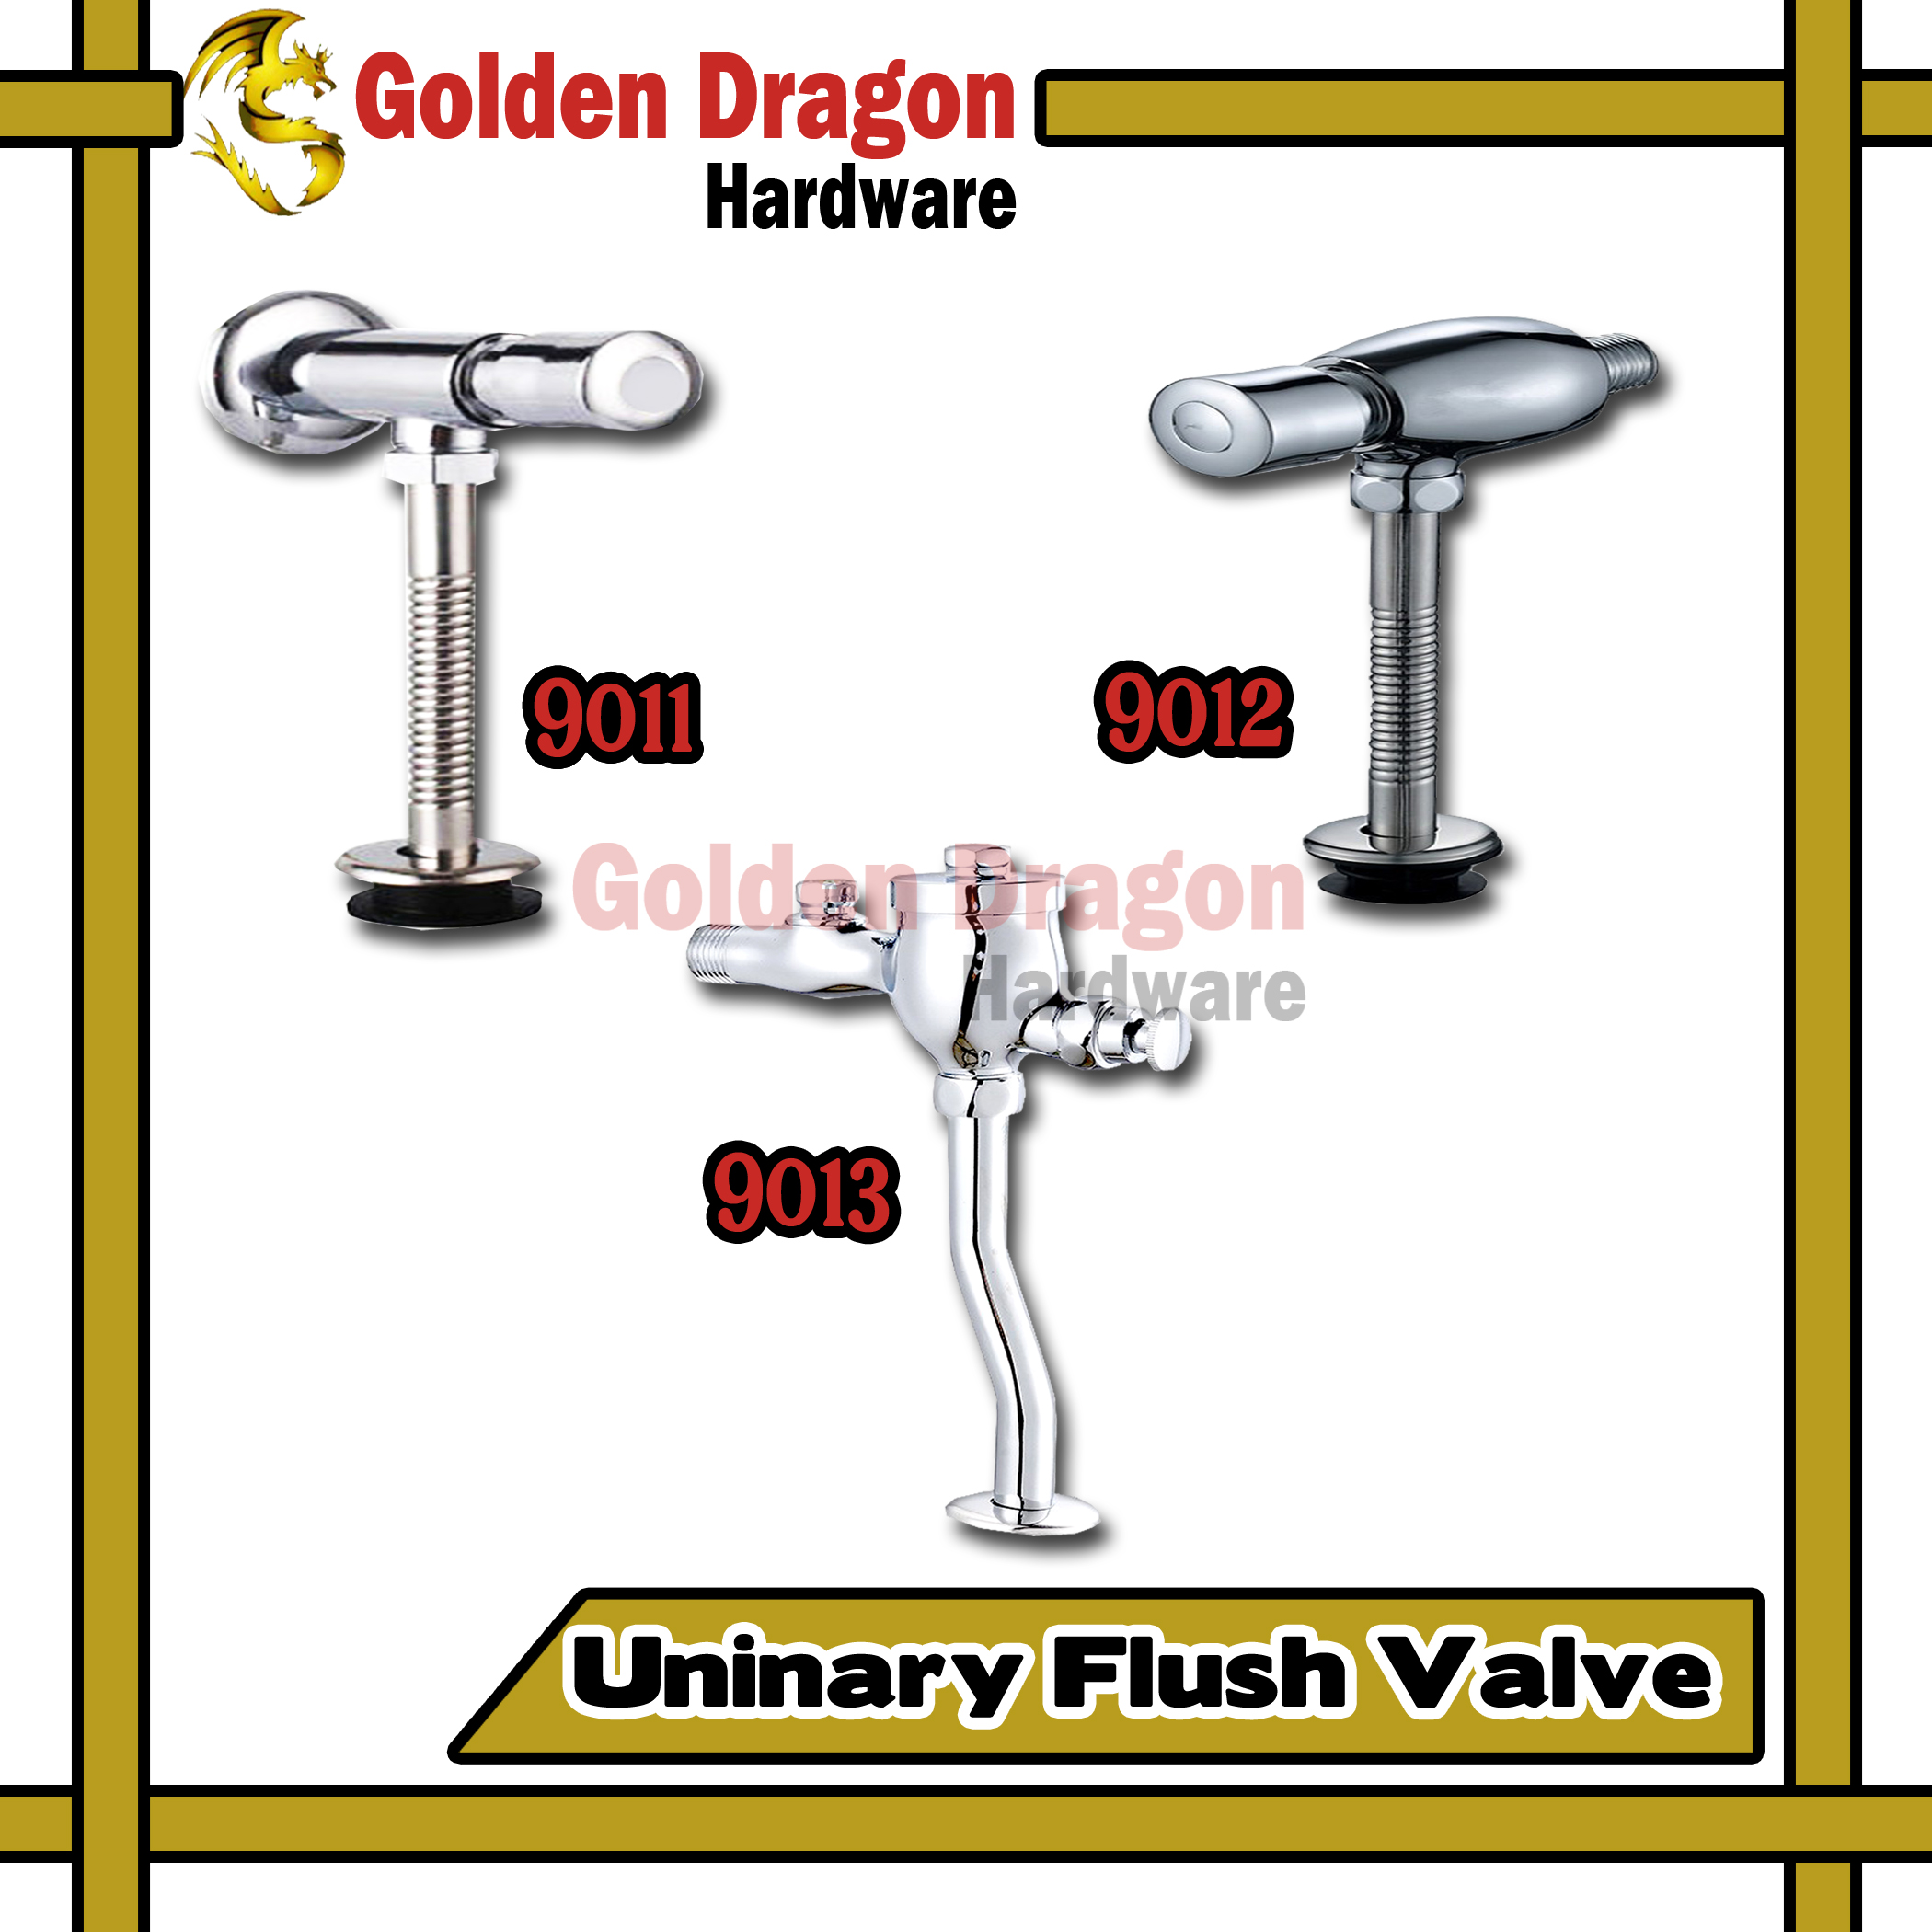 Exposed Urinal Flush Valve Toilet Button Type Manual Delay Automatic Shutoff US 